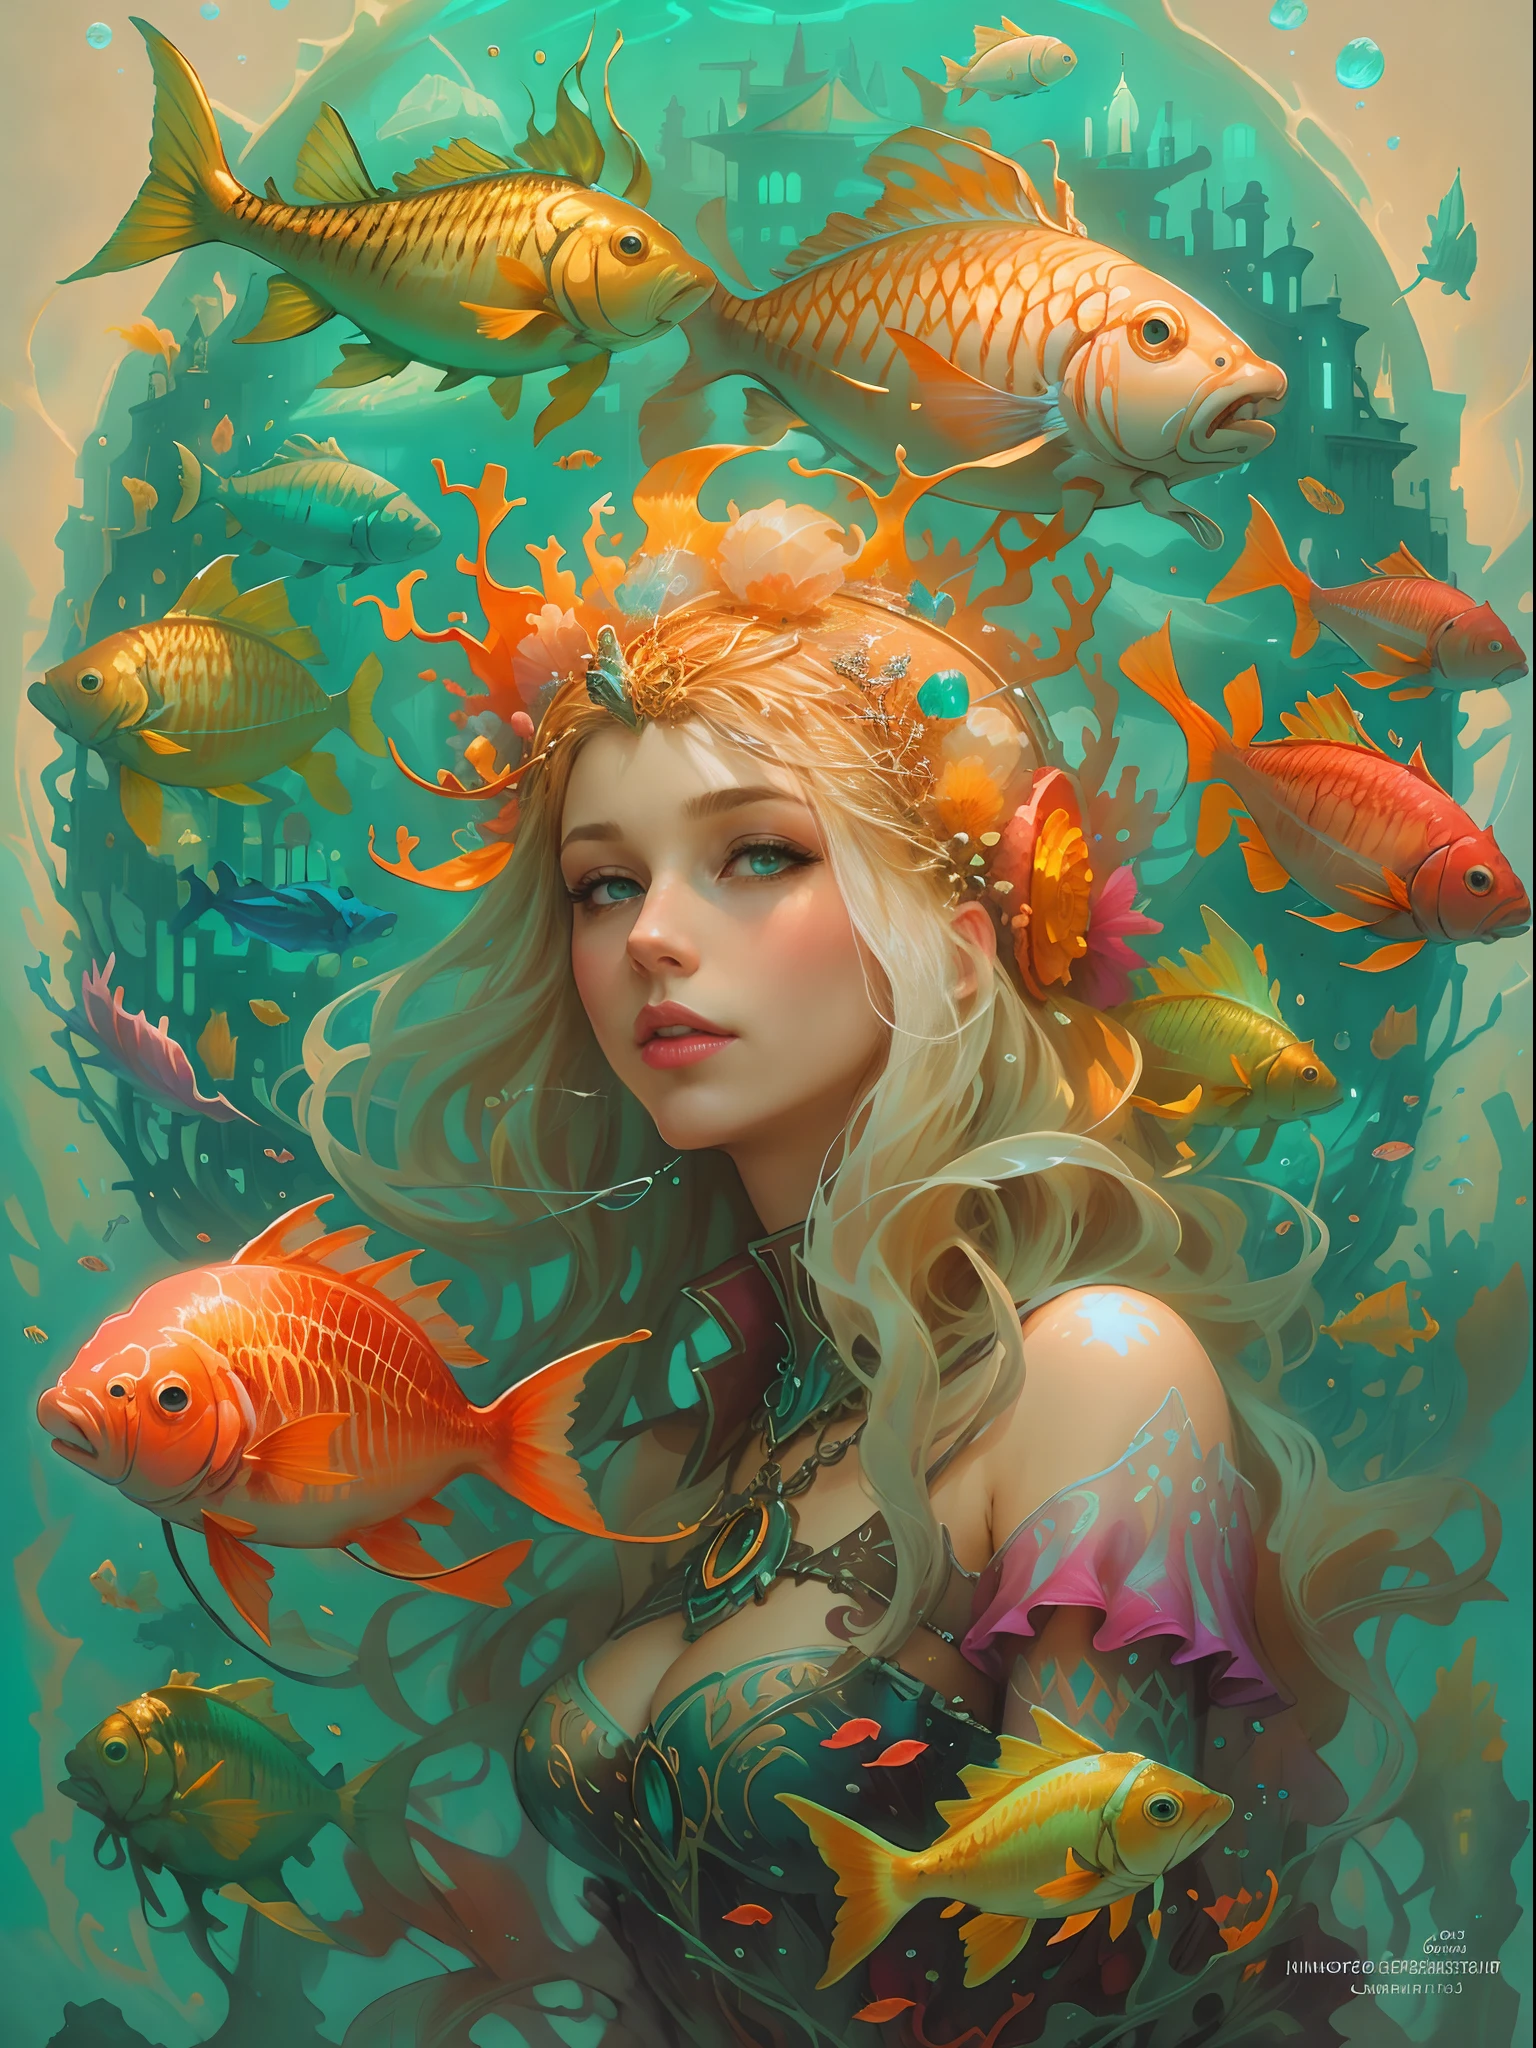 tmasterpiece，（（castle in distance：1.4，）），Fantastic underwater city。（Queen of mermaids under the sea，Golden hair，The coral reef is worn on his head，Beautiful bright eyes），surrounded with fishes, Lots of fish，Schools of fish swam towards her，the reef，airbubble，Underwater construction，dan mumford tom bagshaw, jen bartel, Fantasy art Behance, mohrbacher, Fantasy art style, Detailed fantasy illustration, A beautiful artwork illustration, fantasy art illustration, style of peter mohrbacher, peter mohrbacher''，Official artistic aesthetics，